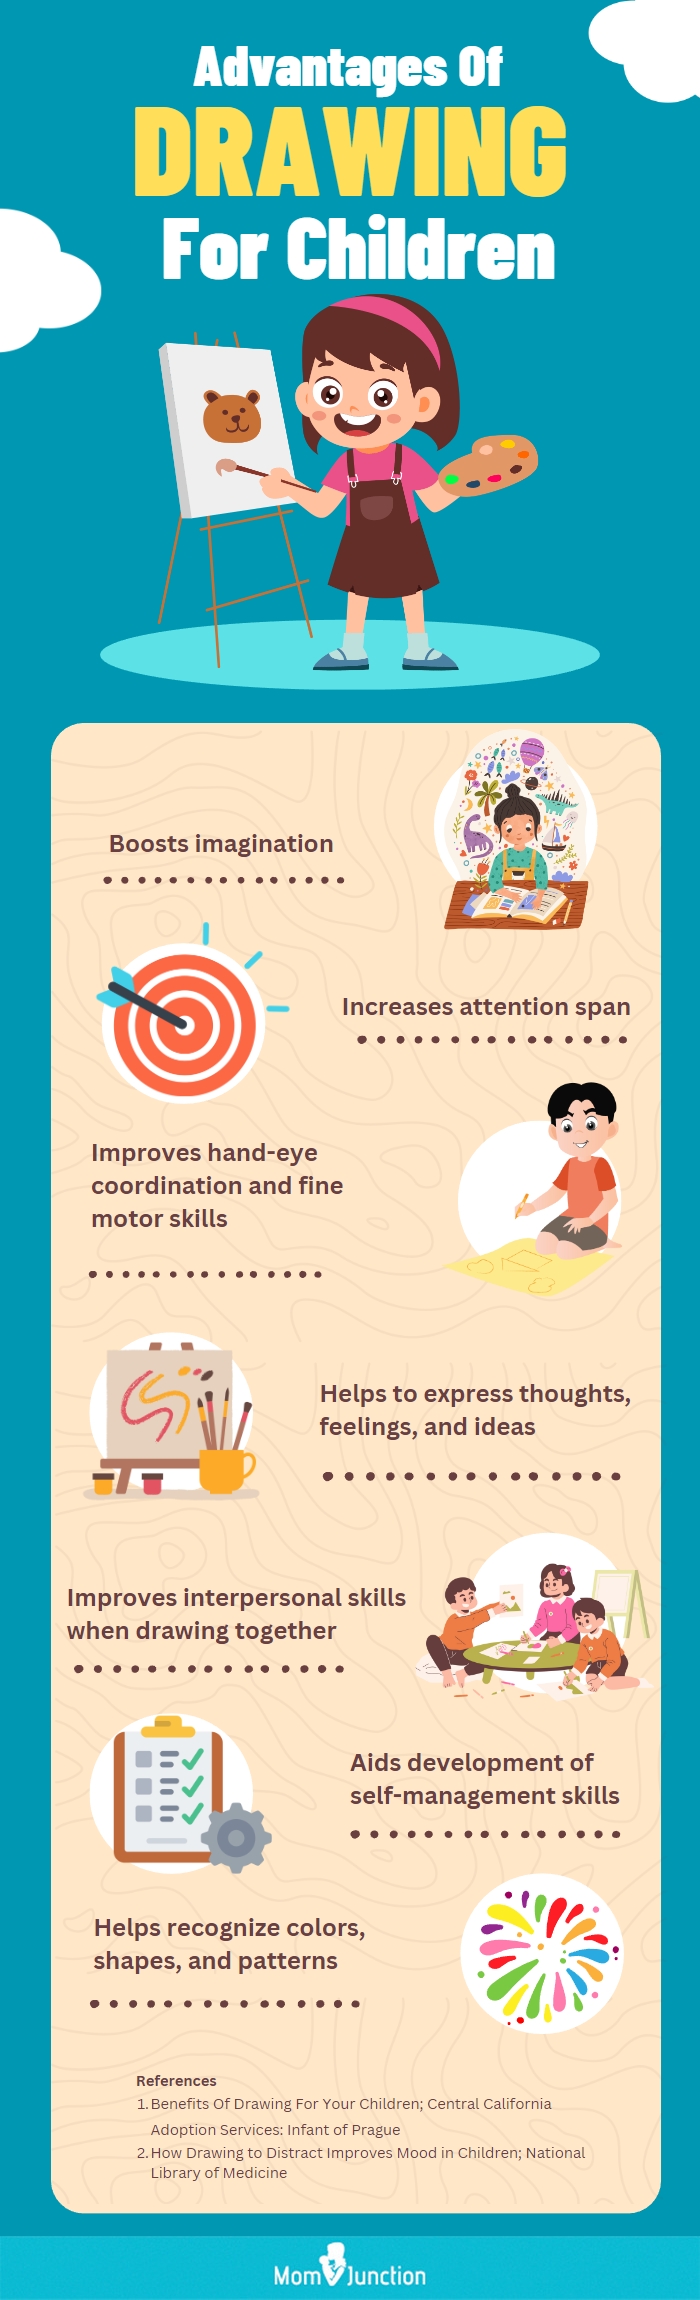 advantages of drawing for children (infographic)